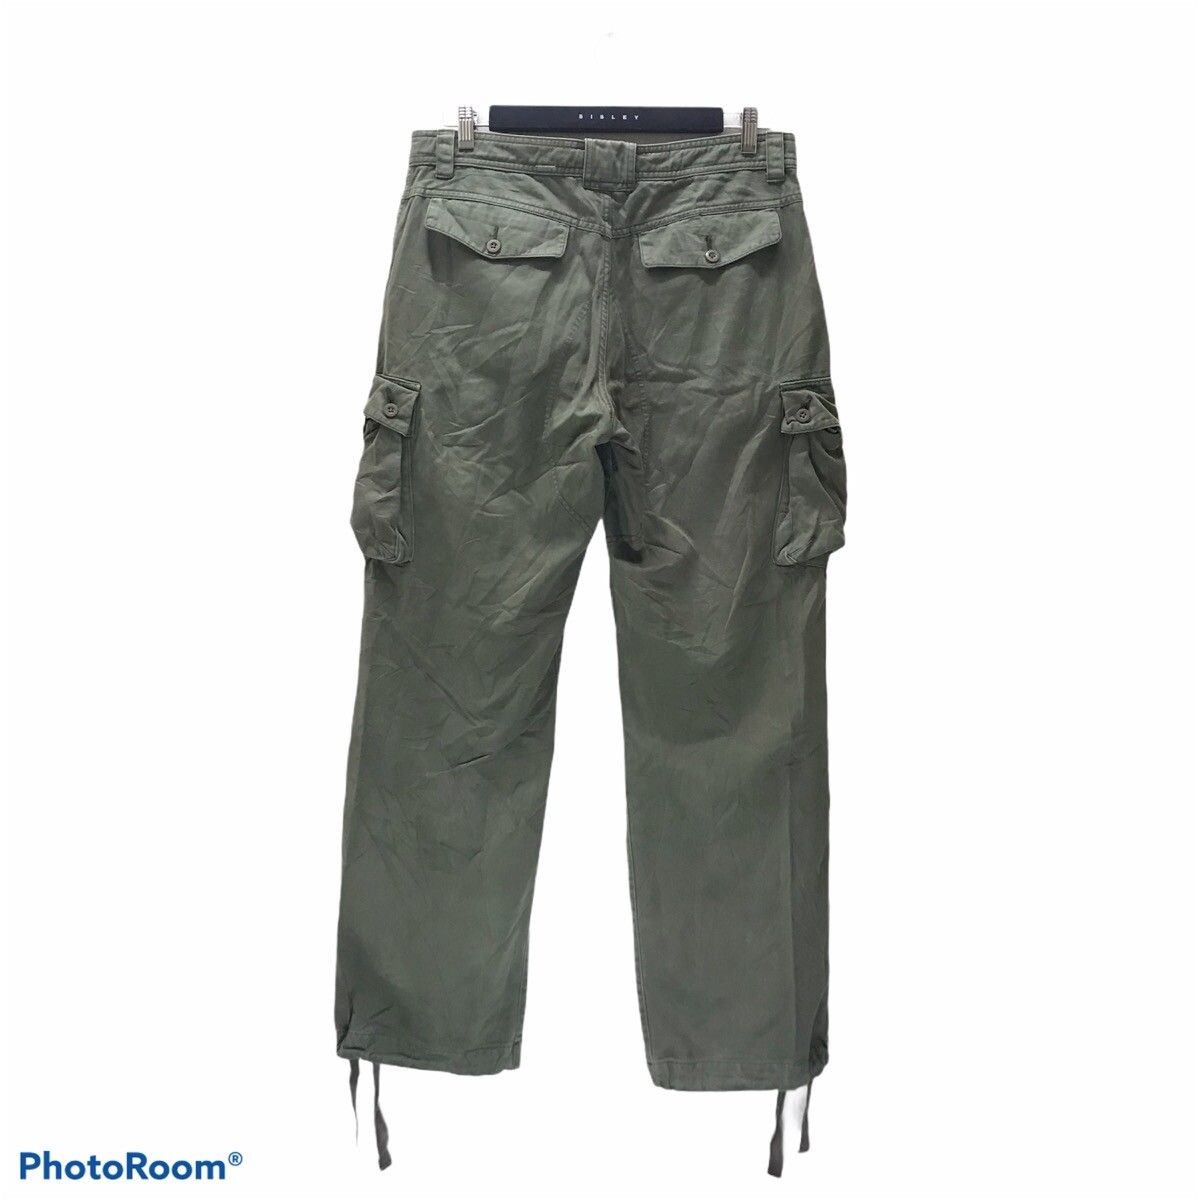 Margaret Howell MHL by Margaret Howell Cargo Pants Funtion And Utility Size US 34 / EU 50 - 2 Preview